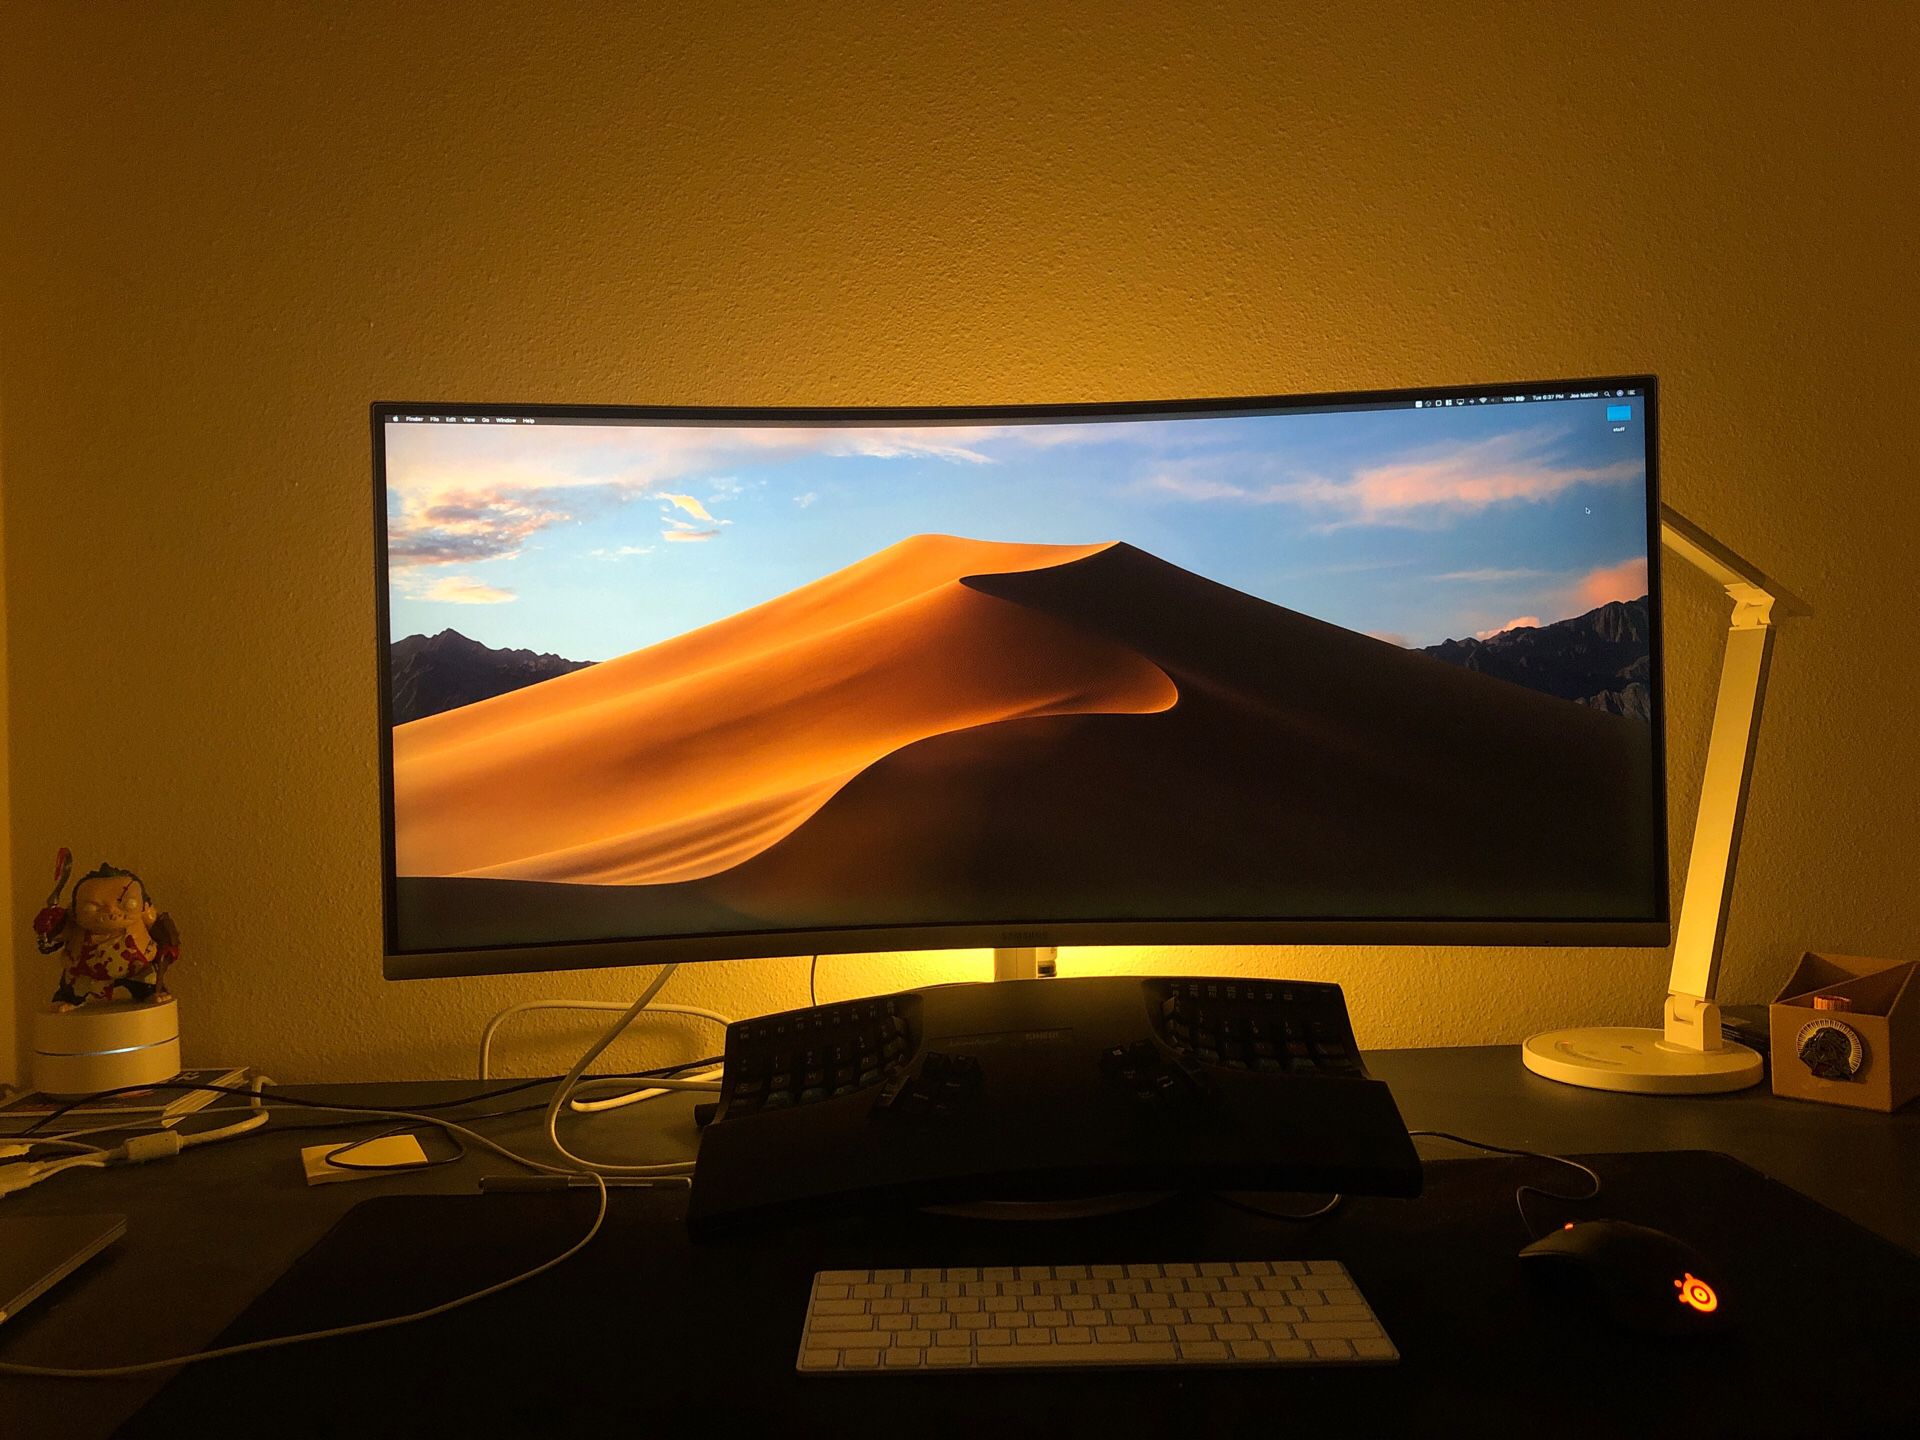 Samsung 34” CF791 Curved Widescreen Monitor